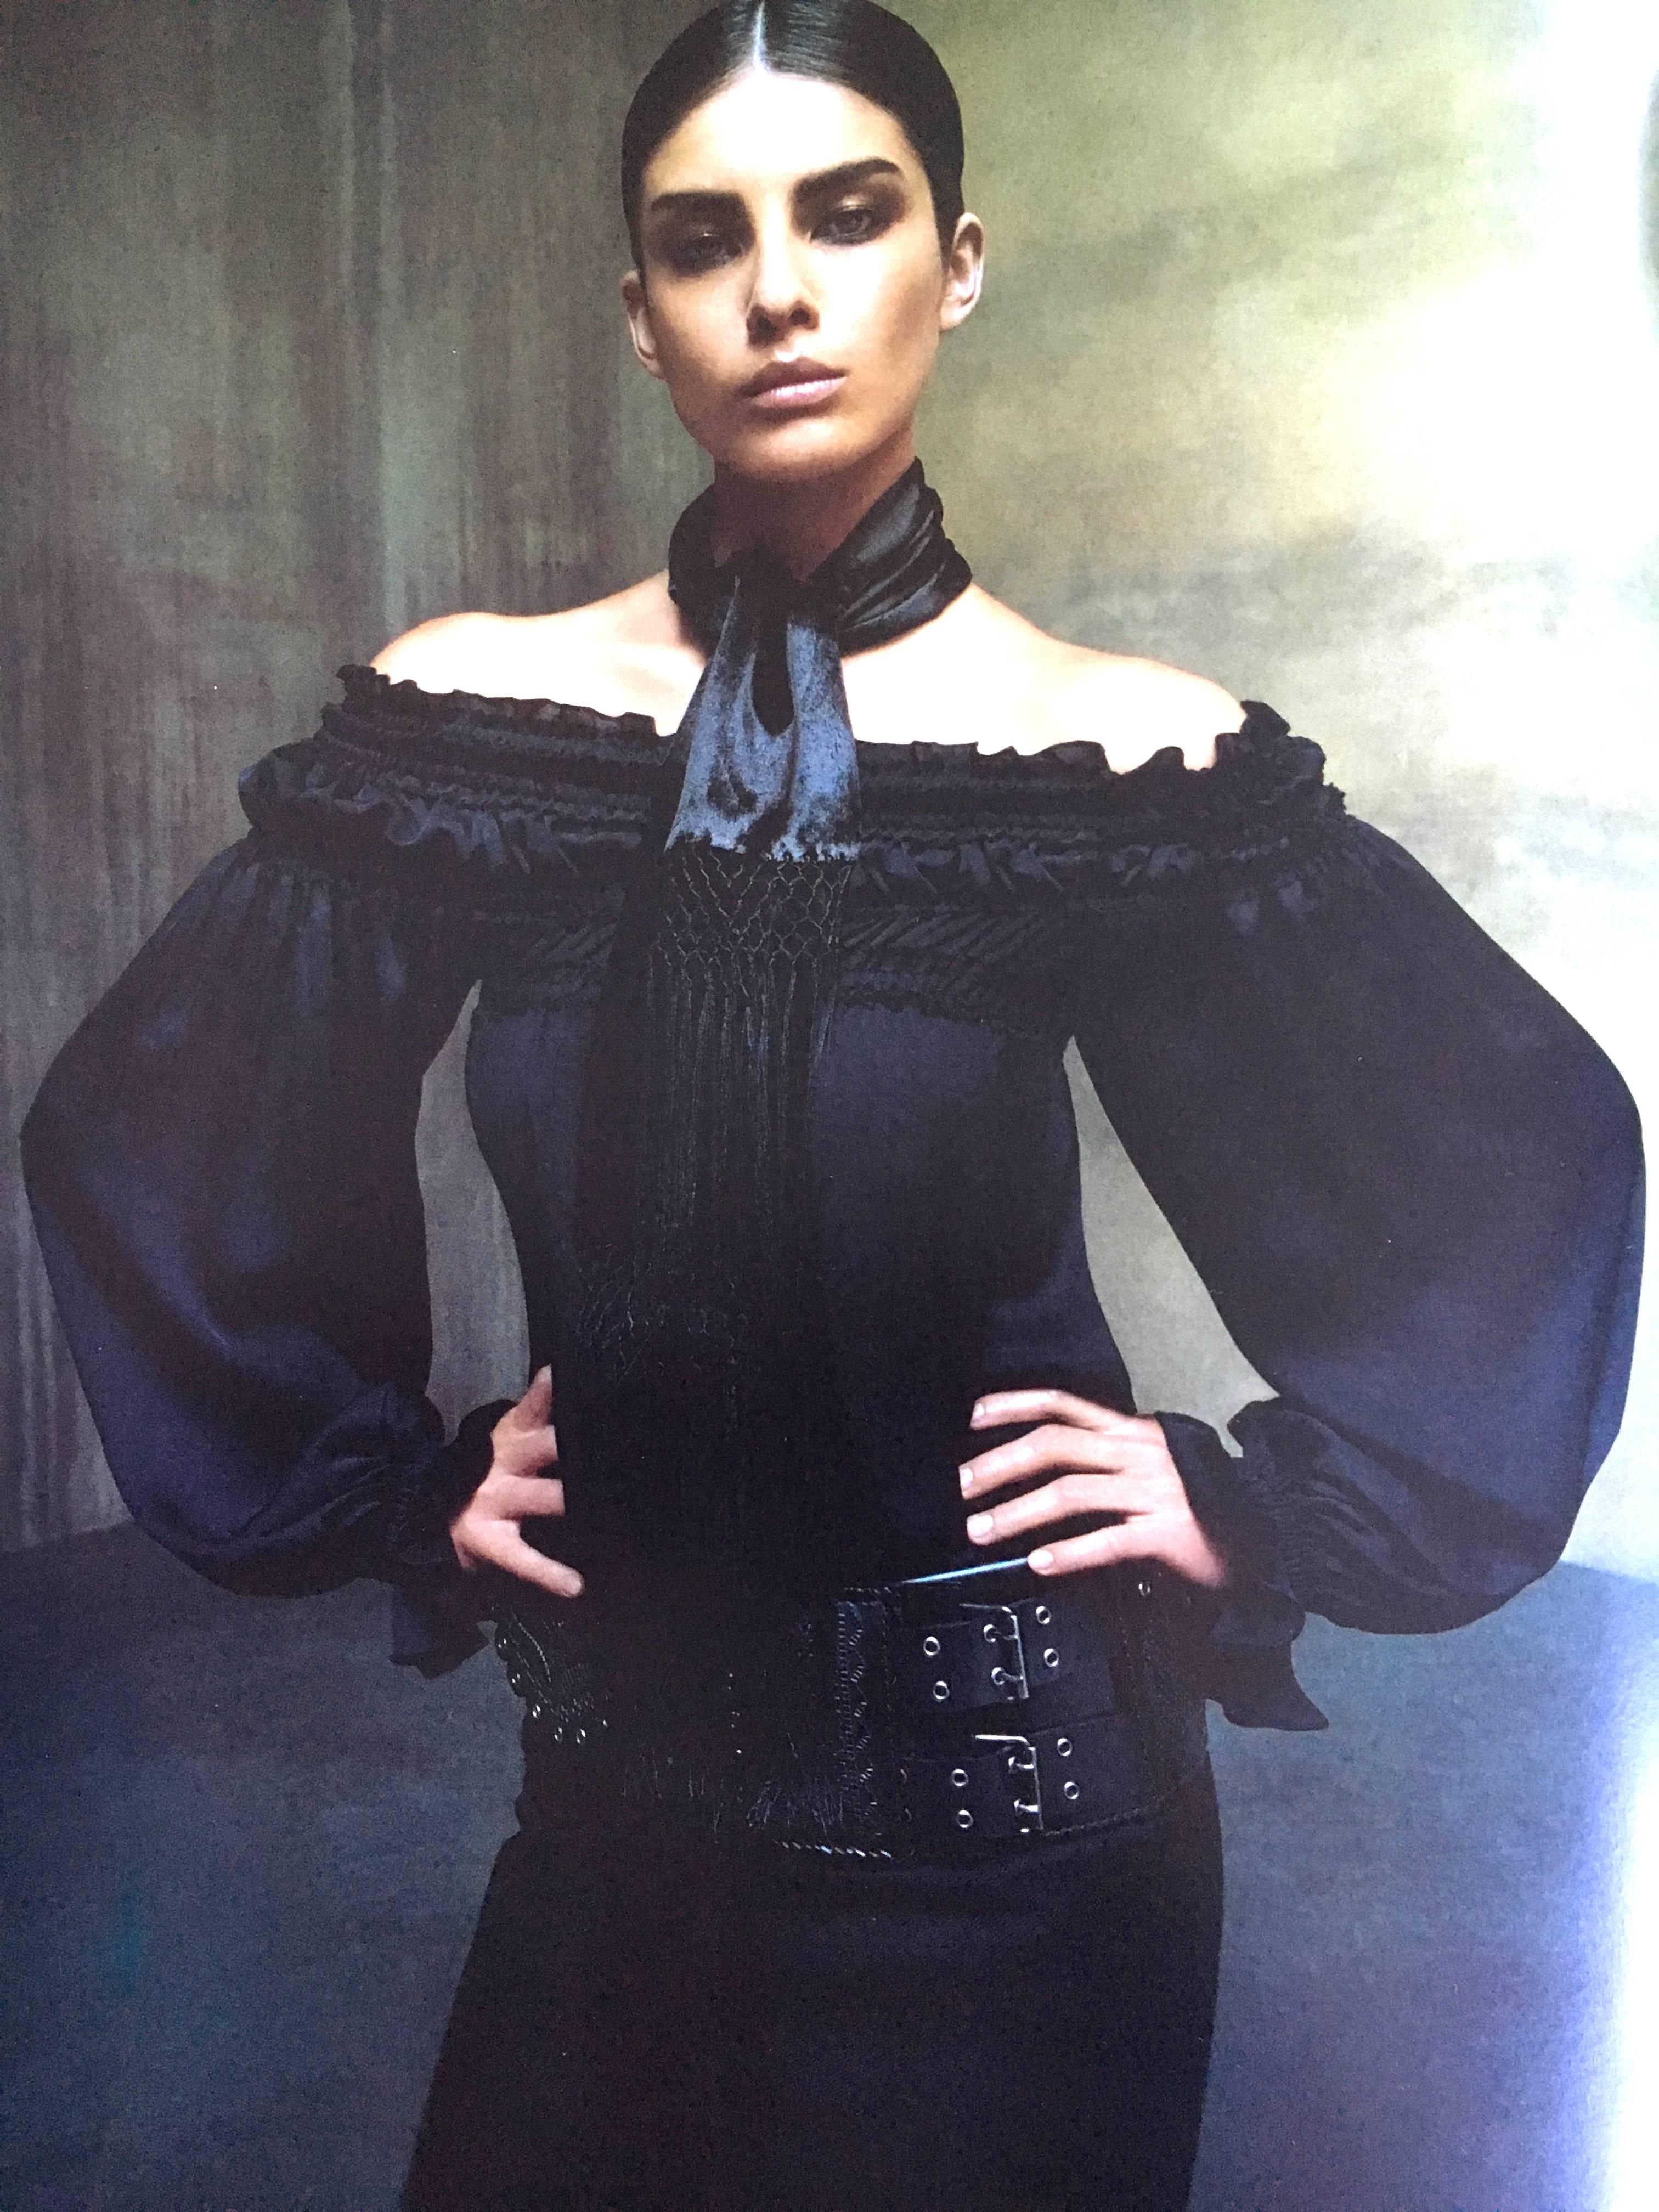 Yves Saint Laurent Tom Ford Silk Off the Shoulder Peasant Blouse .
Full page in the Tom For Book.
Size 36
Bust 36